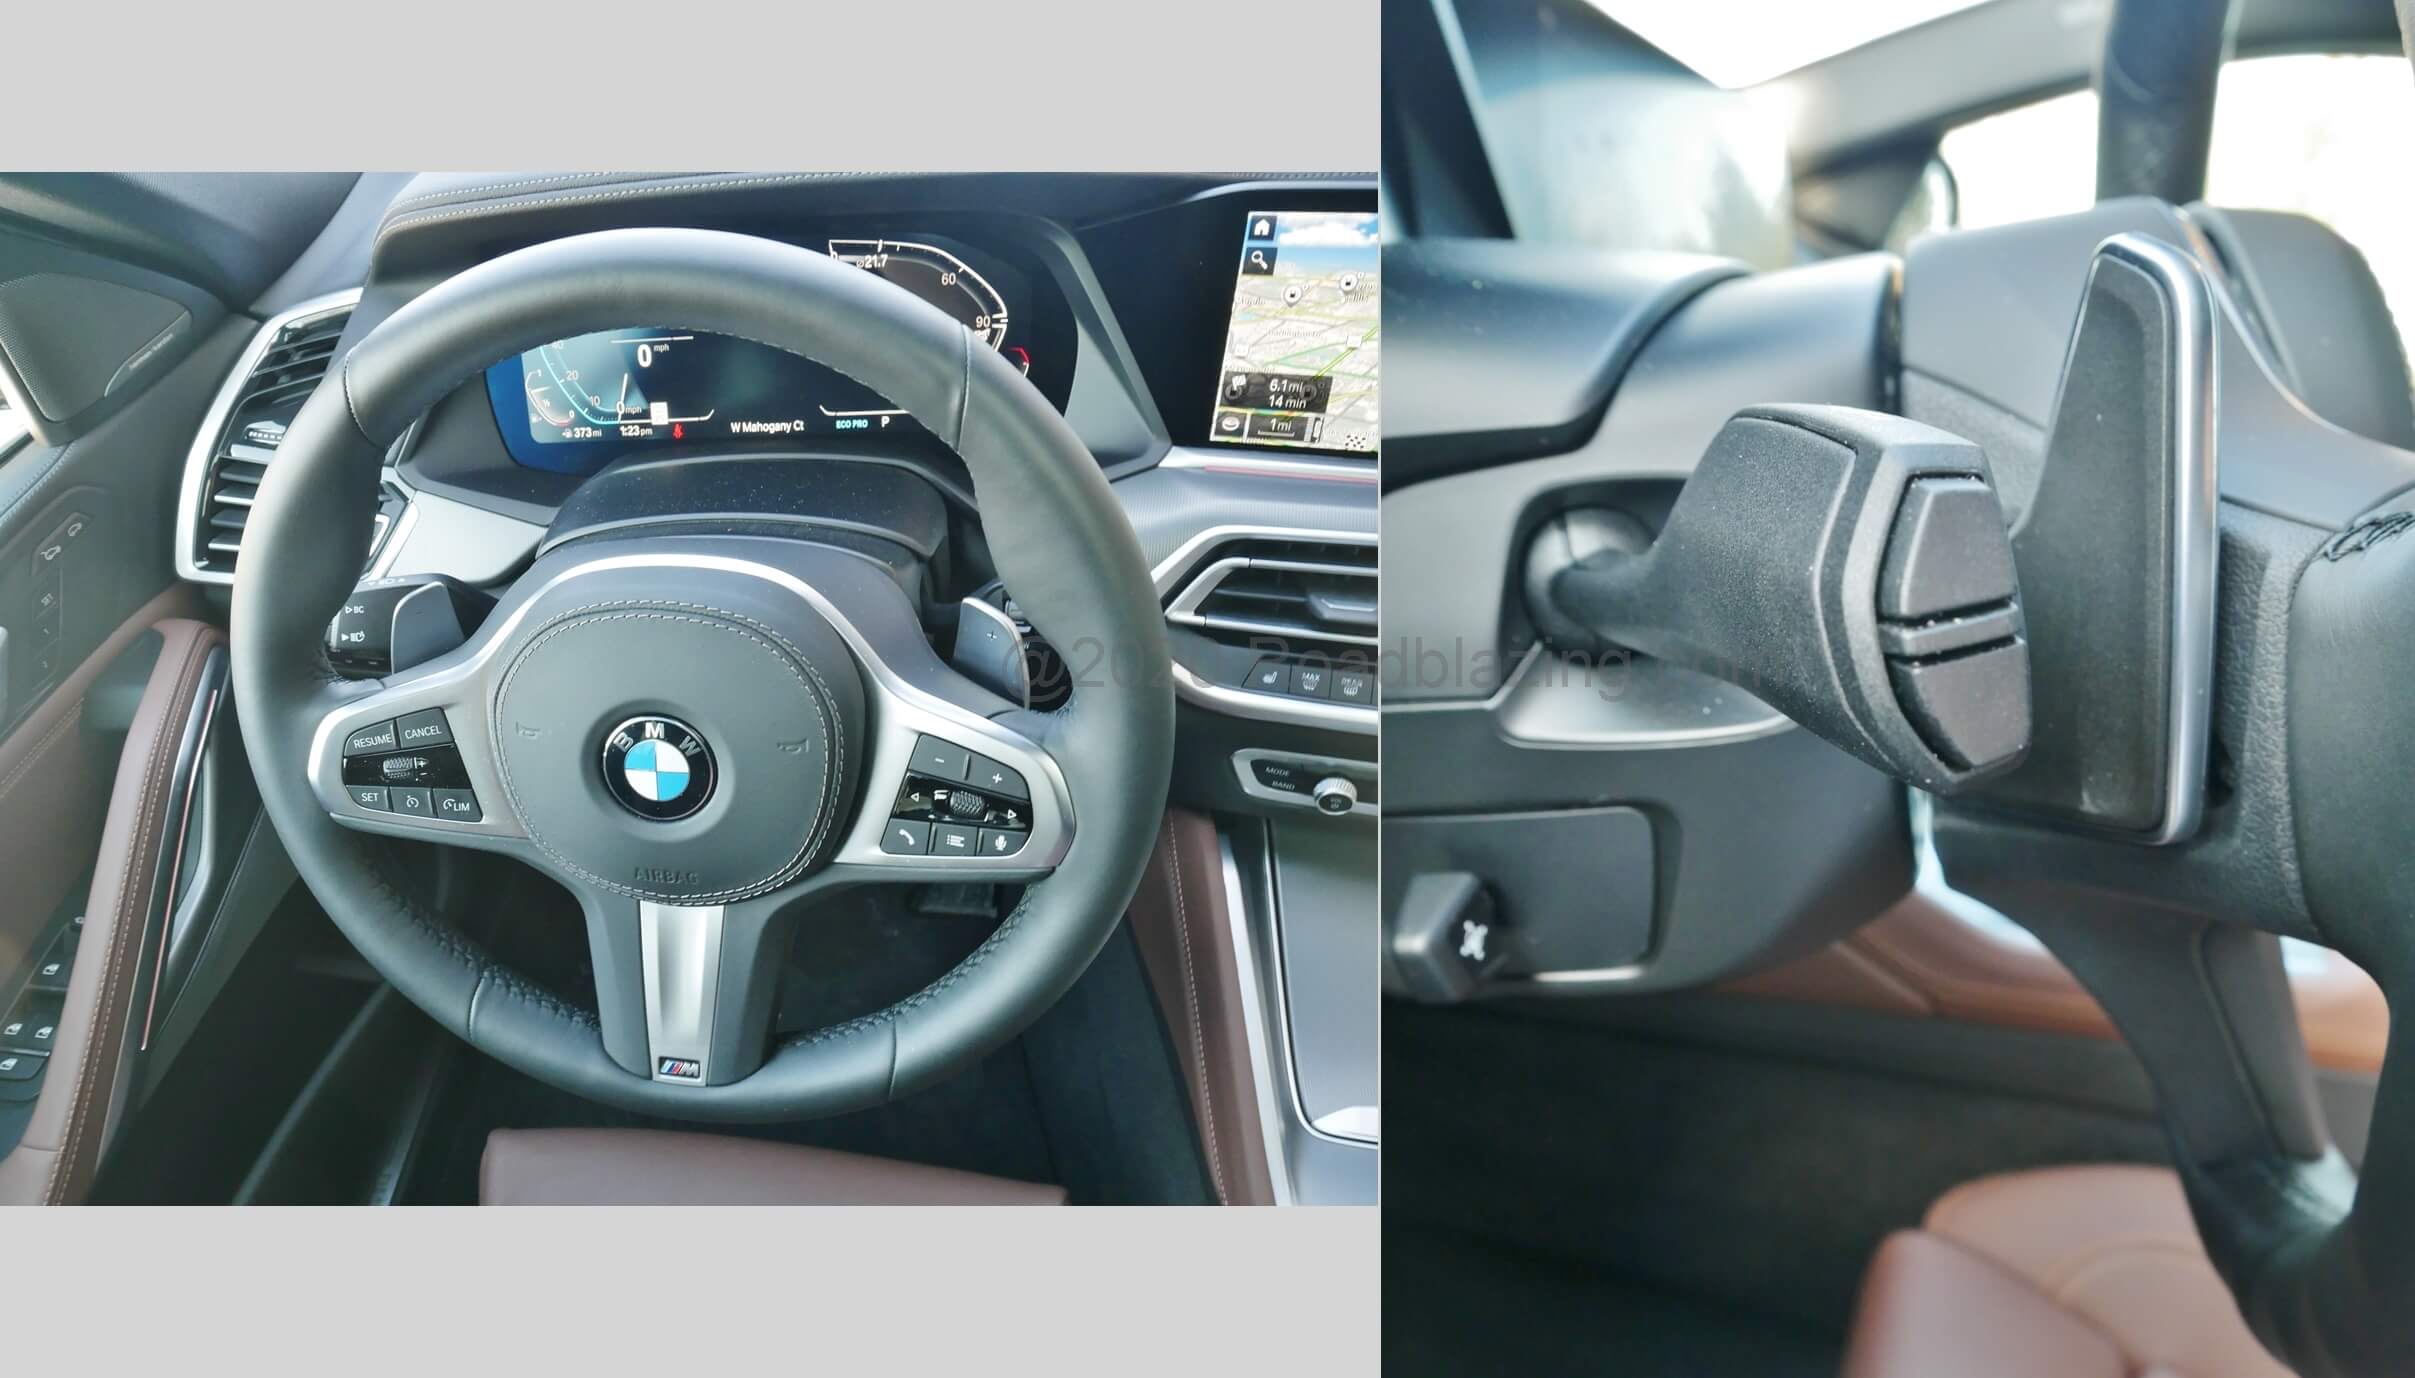 2020 BMW X6 xDrive 40i: M Sport French stitched leather, power adjusting, paddle shifting, but not heated steering wheel